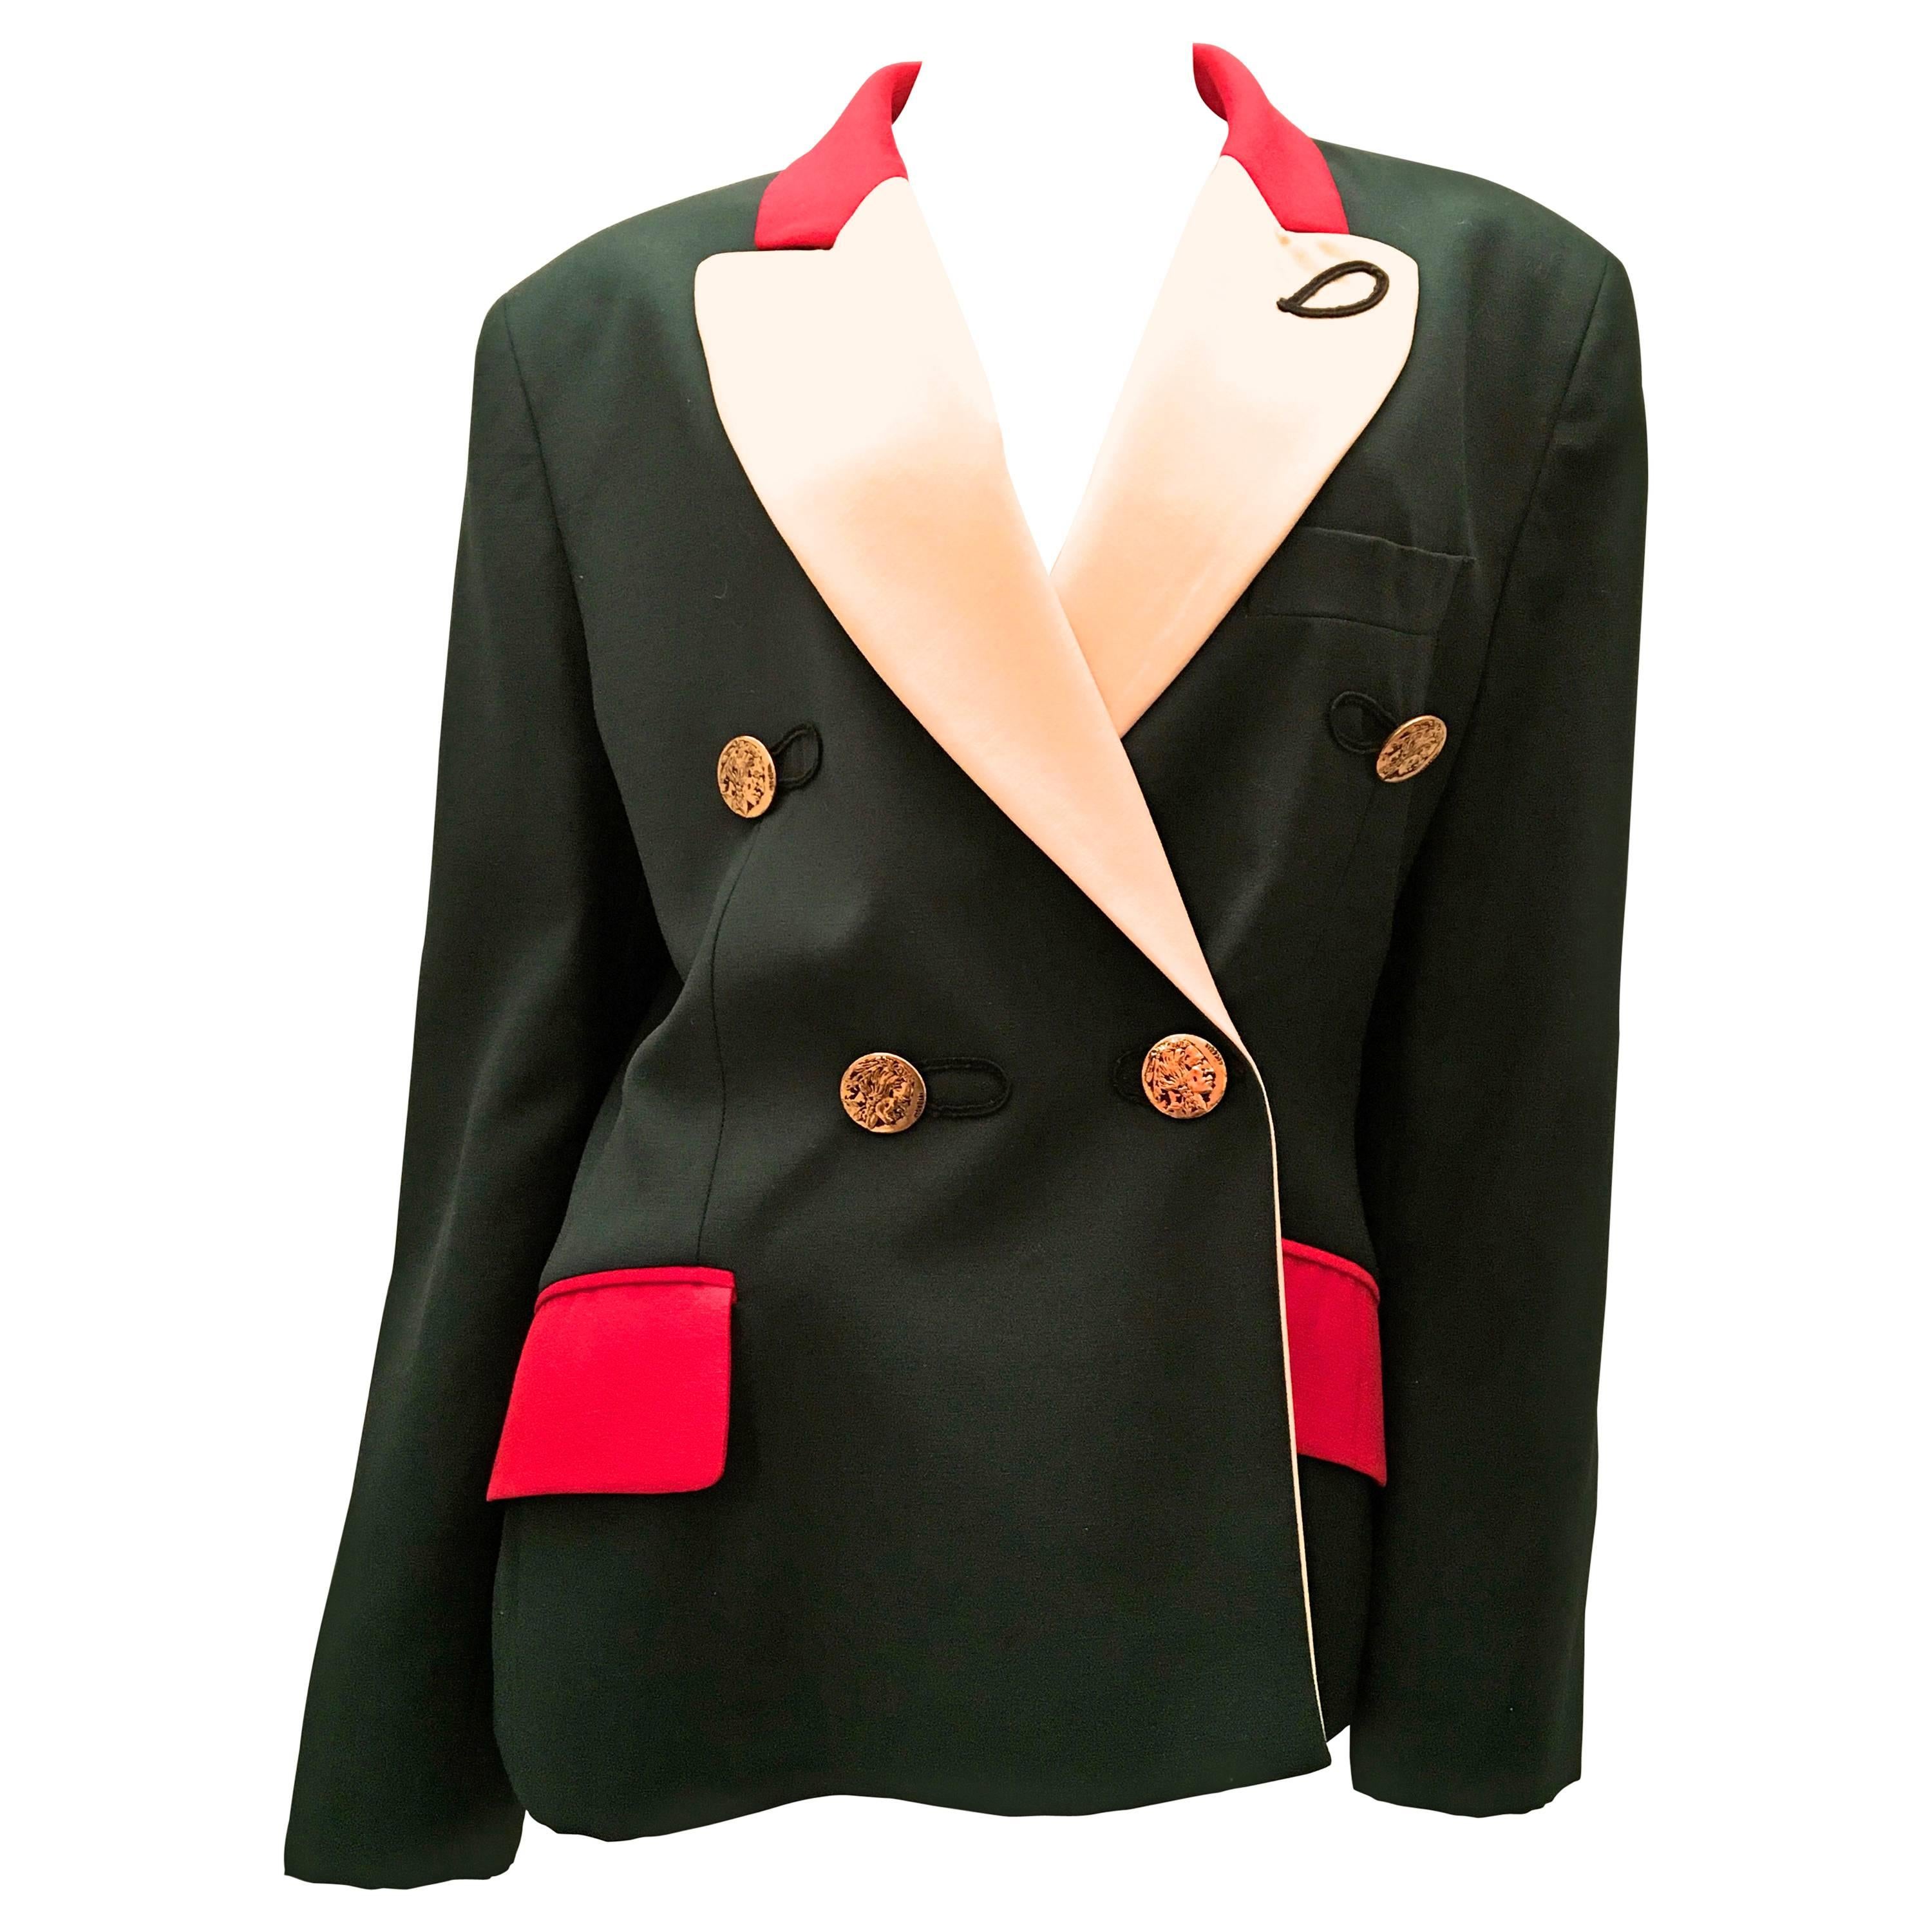 Moschino Cheap and Chic  Blazer - Green, Red, and Cream For Sale